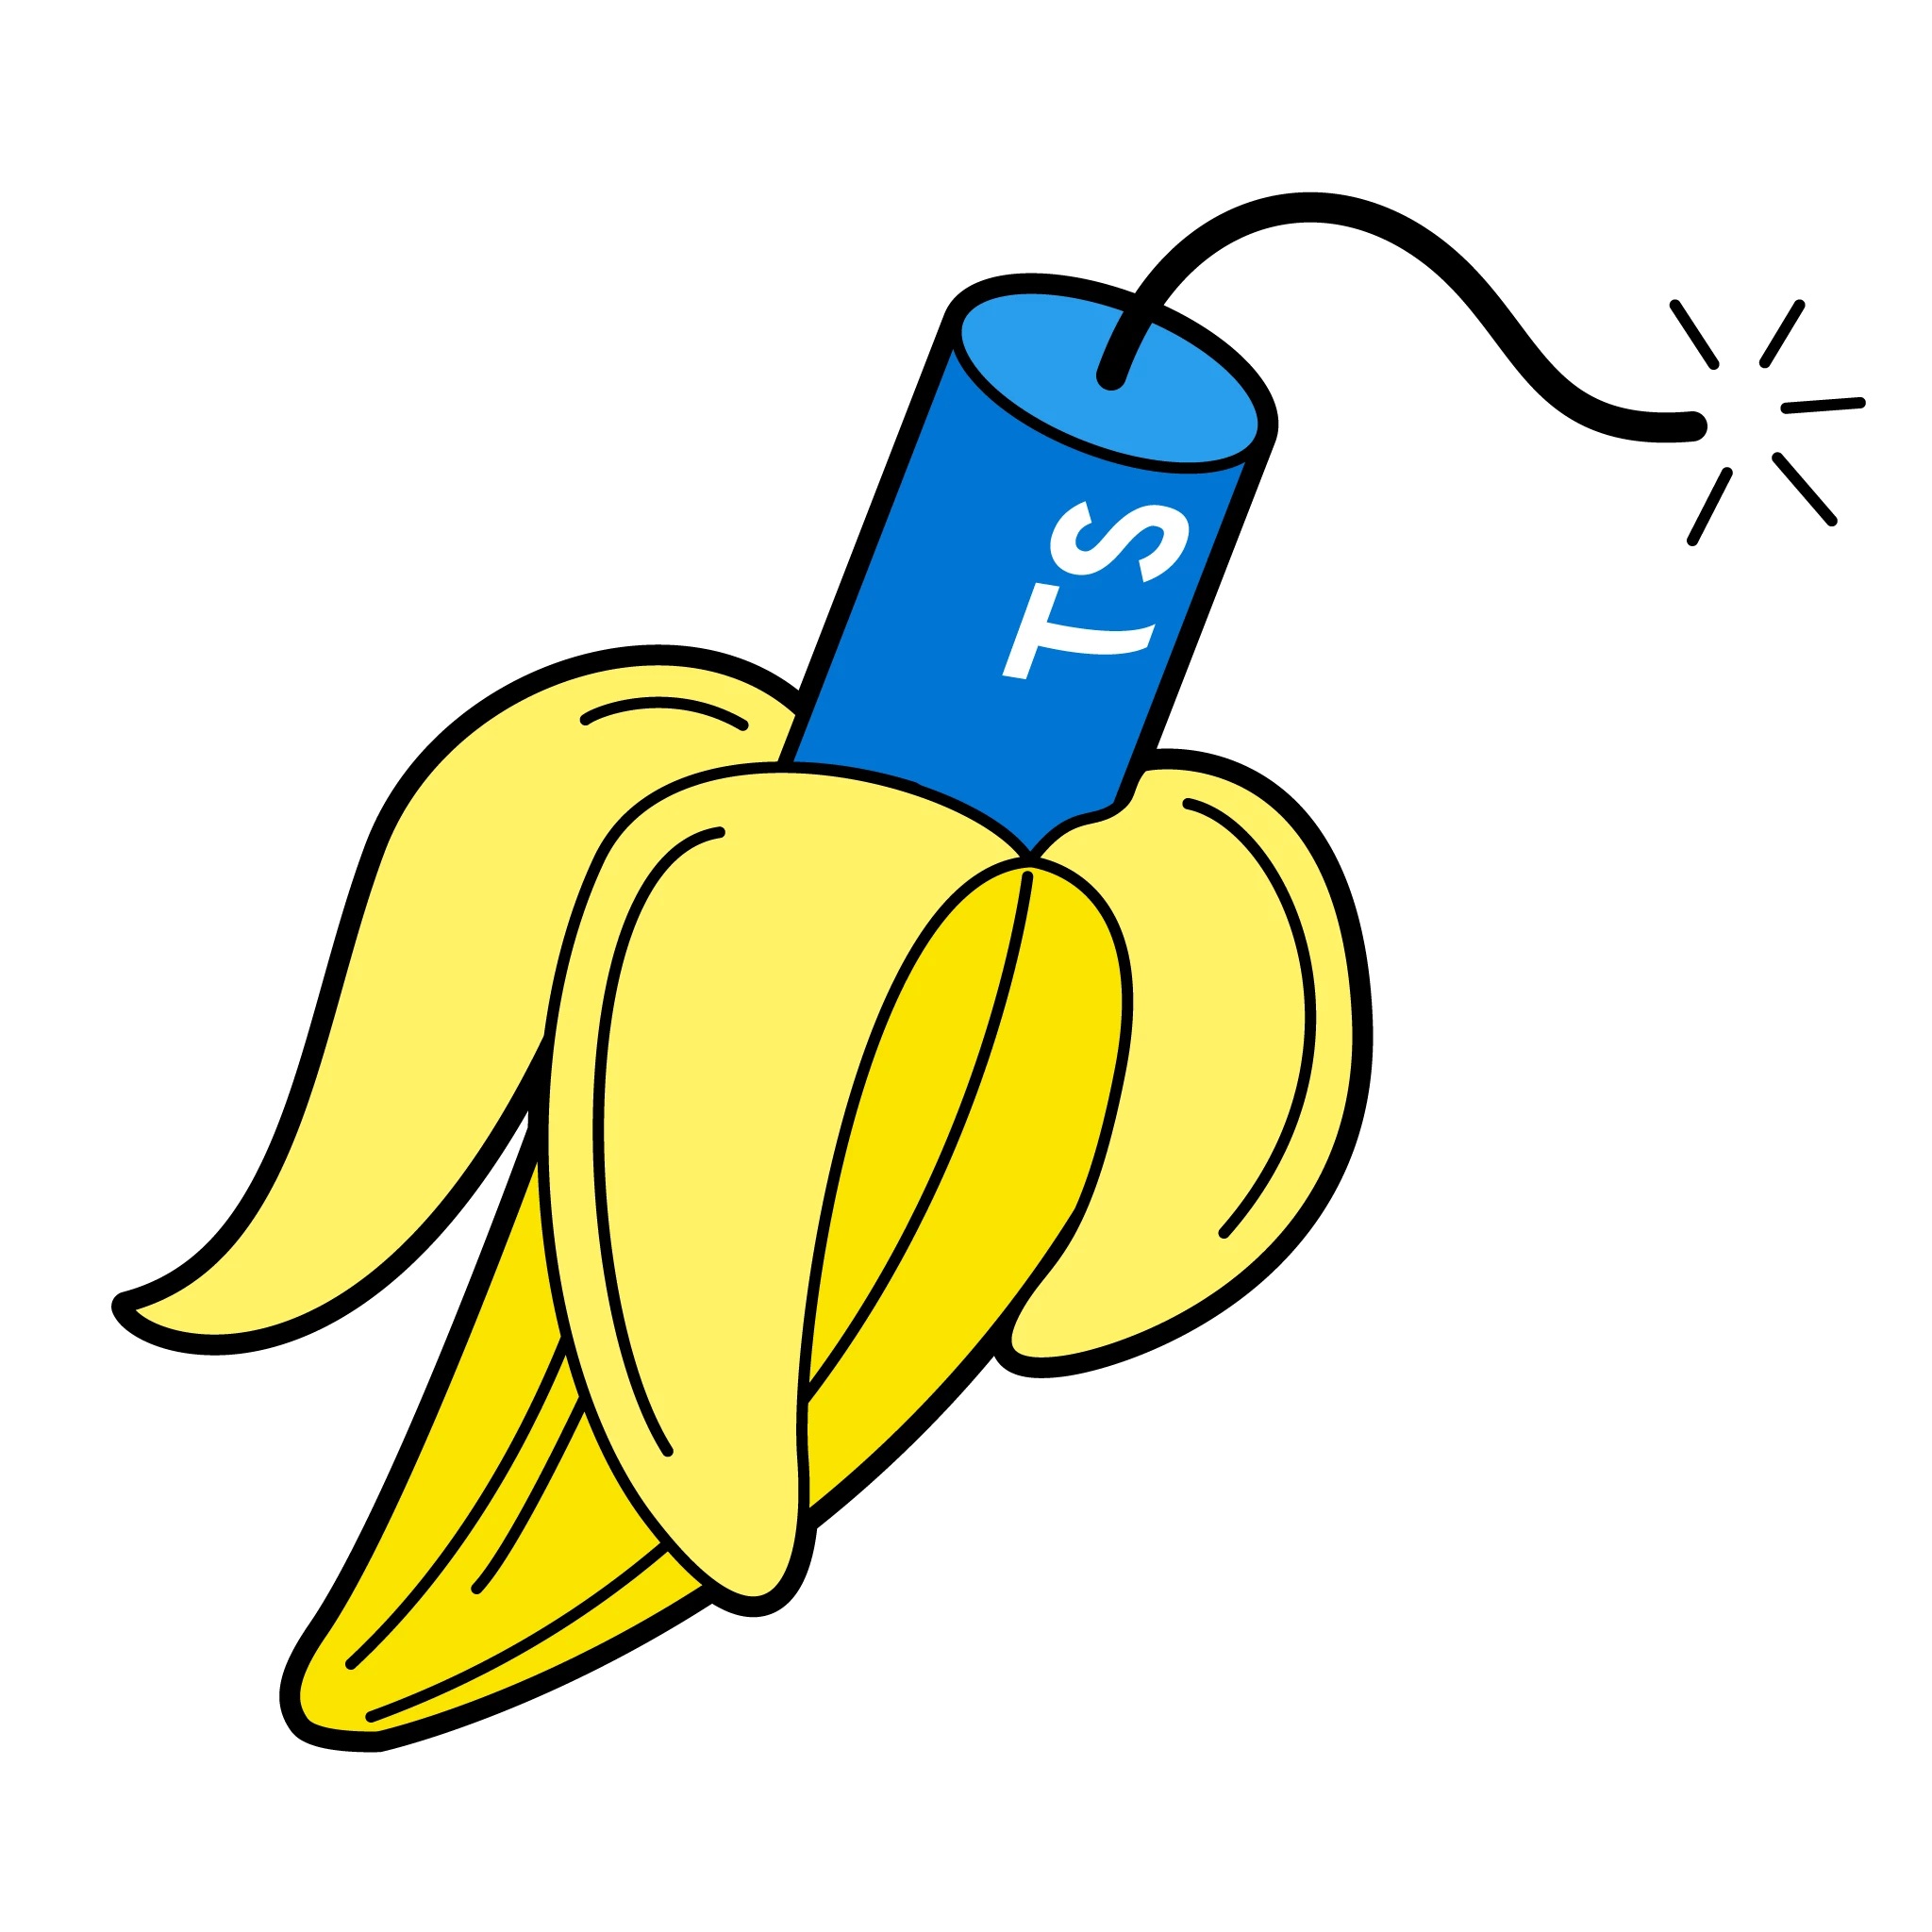 A stick of dynamite stylized to look like the TypeScript logo is lit and unpeeling from a yellow banana.